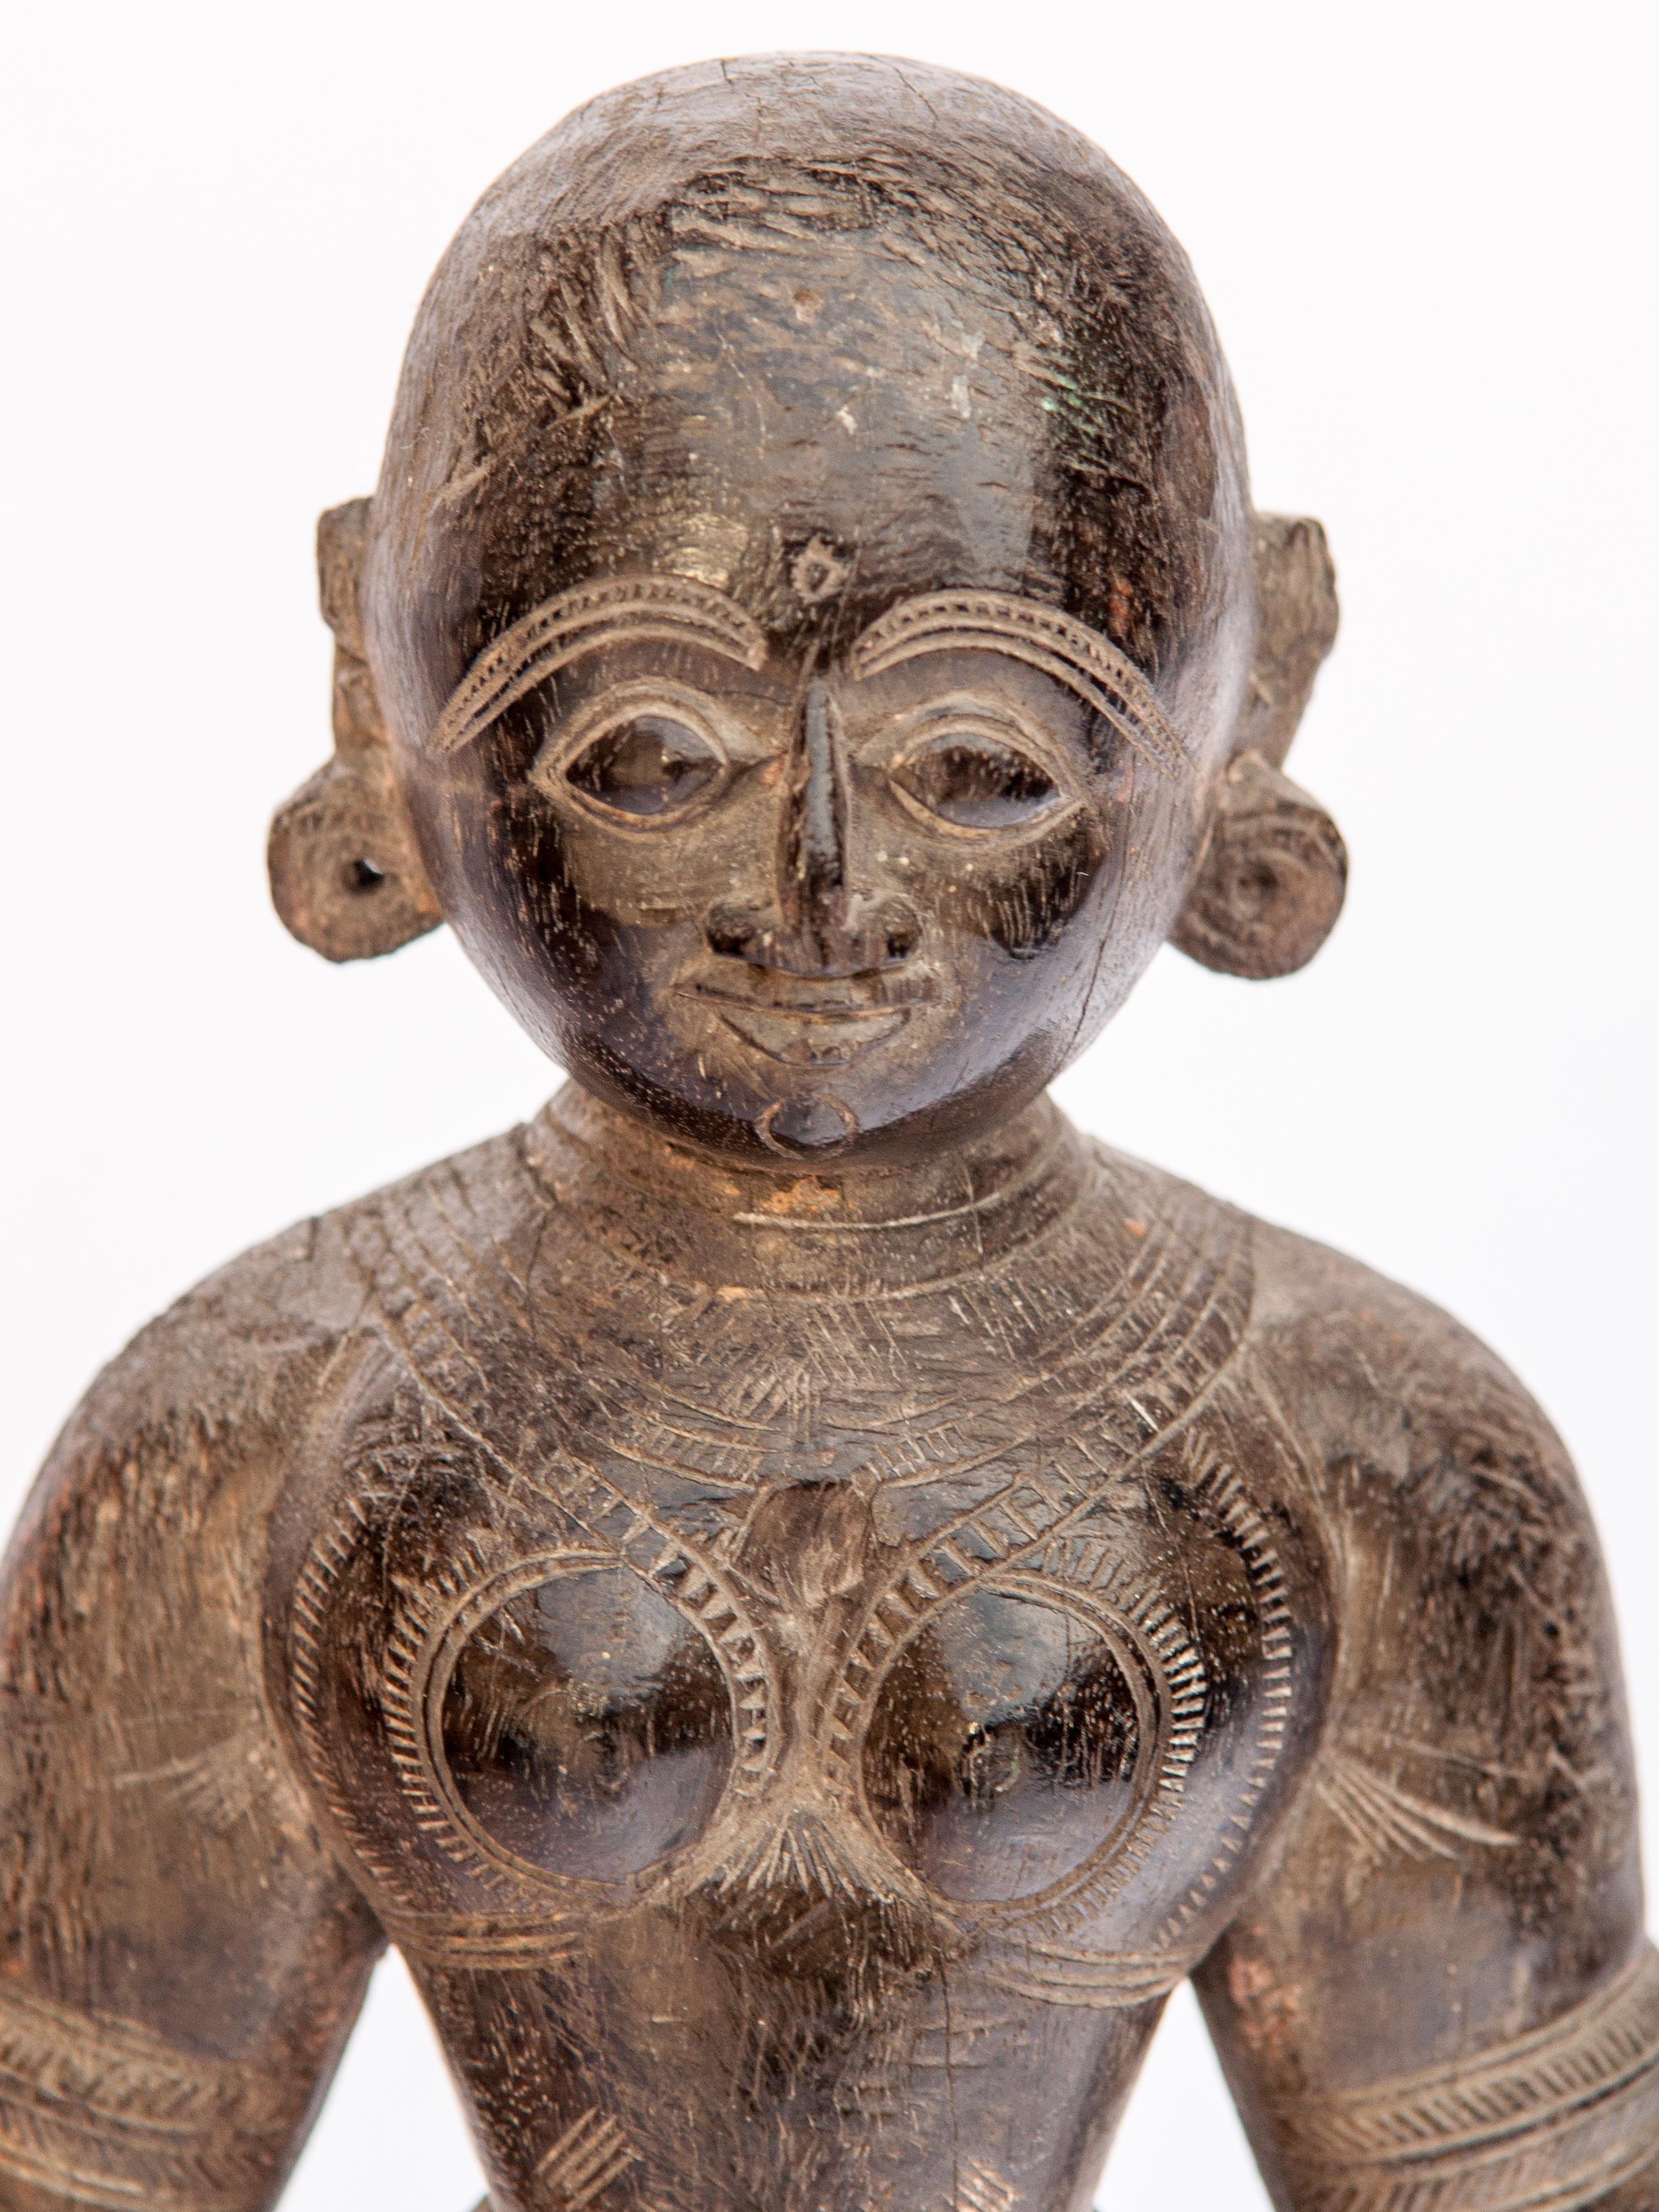 Wood Marapachi doll from Tamil Nadu, mid-20th century, hand-carved of a dense dark wood, mounted on a metal stand.
In the southern Indian state of Tamil Nadu parents present their daughter a pair of dolls, Marapachi Bommai, literally wooden dolls,